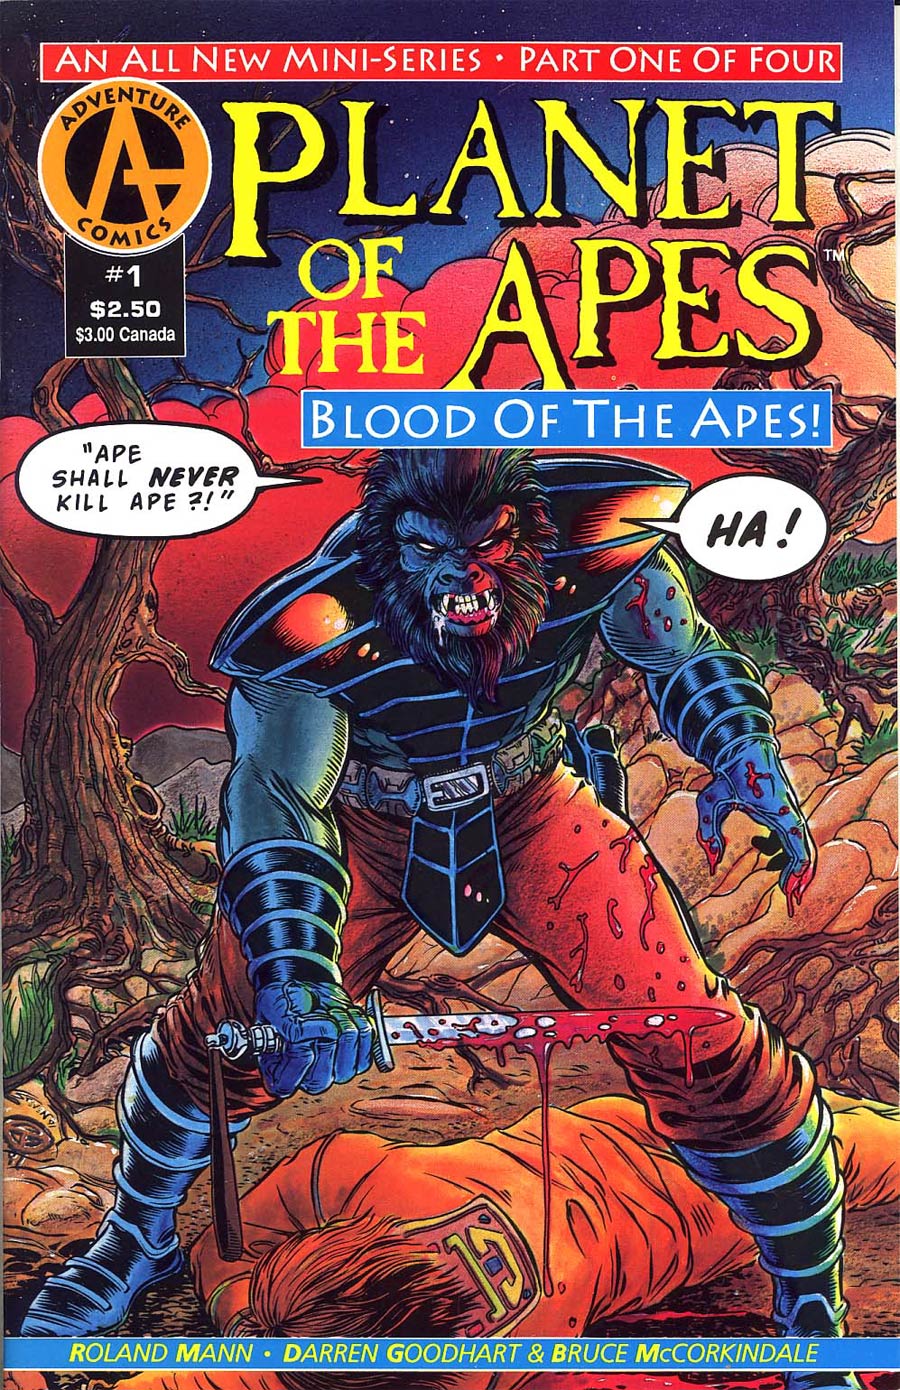 Planet Of The Apes Blood of The Apes #1